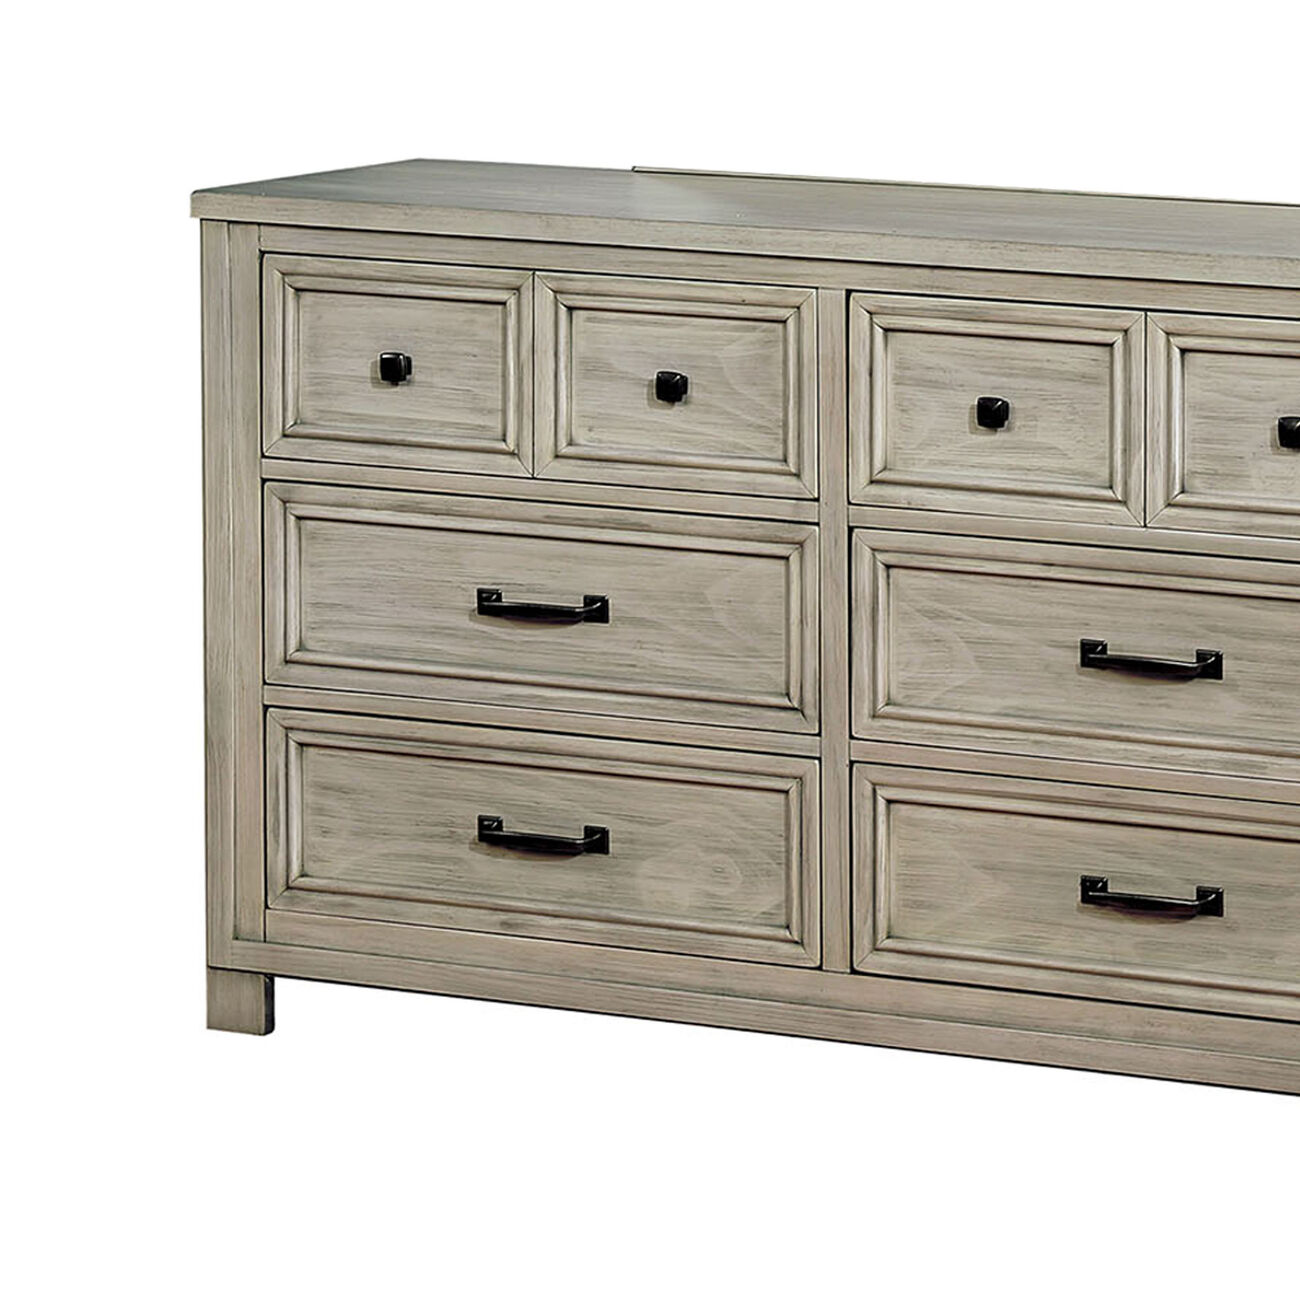 6 Drawer Transitional Wooden Dresser with Molded Trim, Antique white